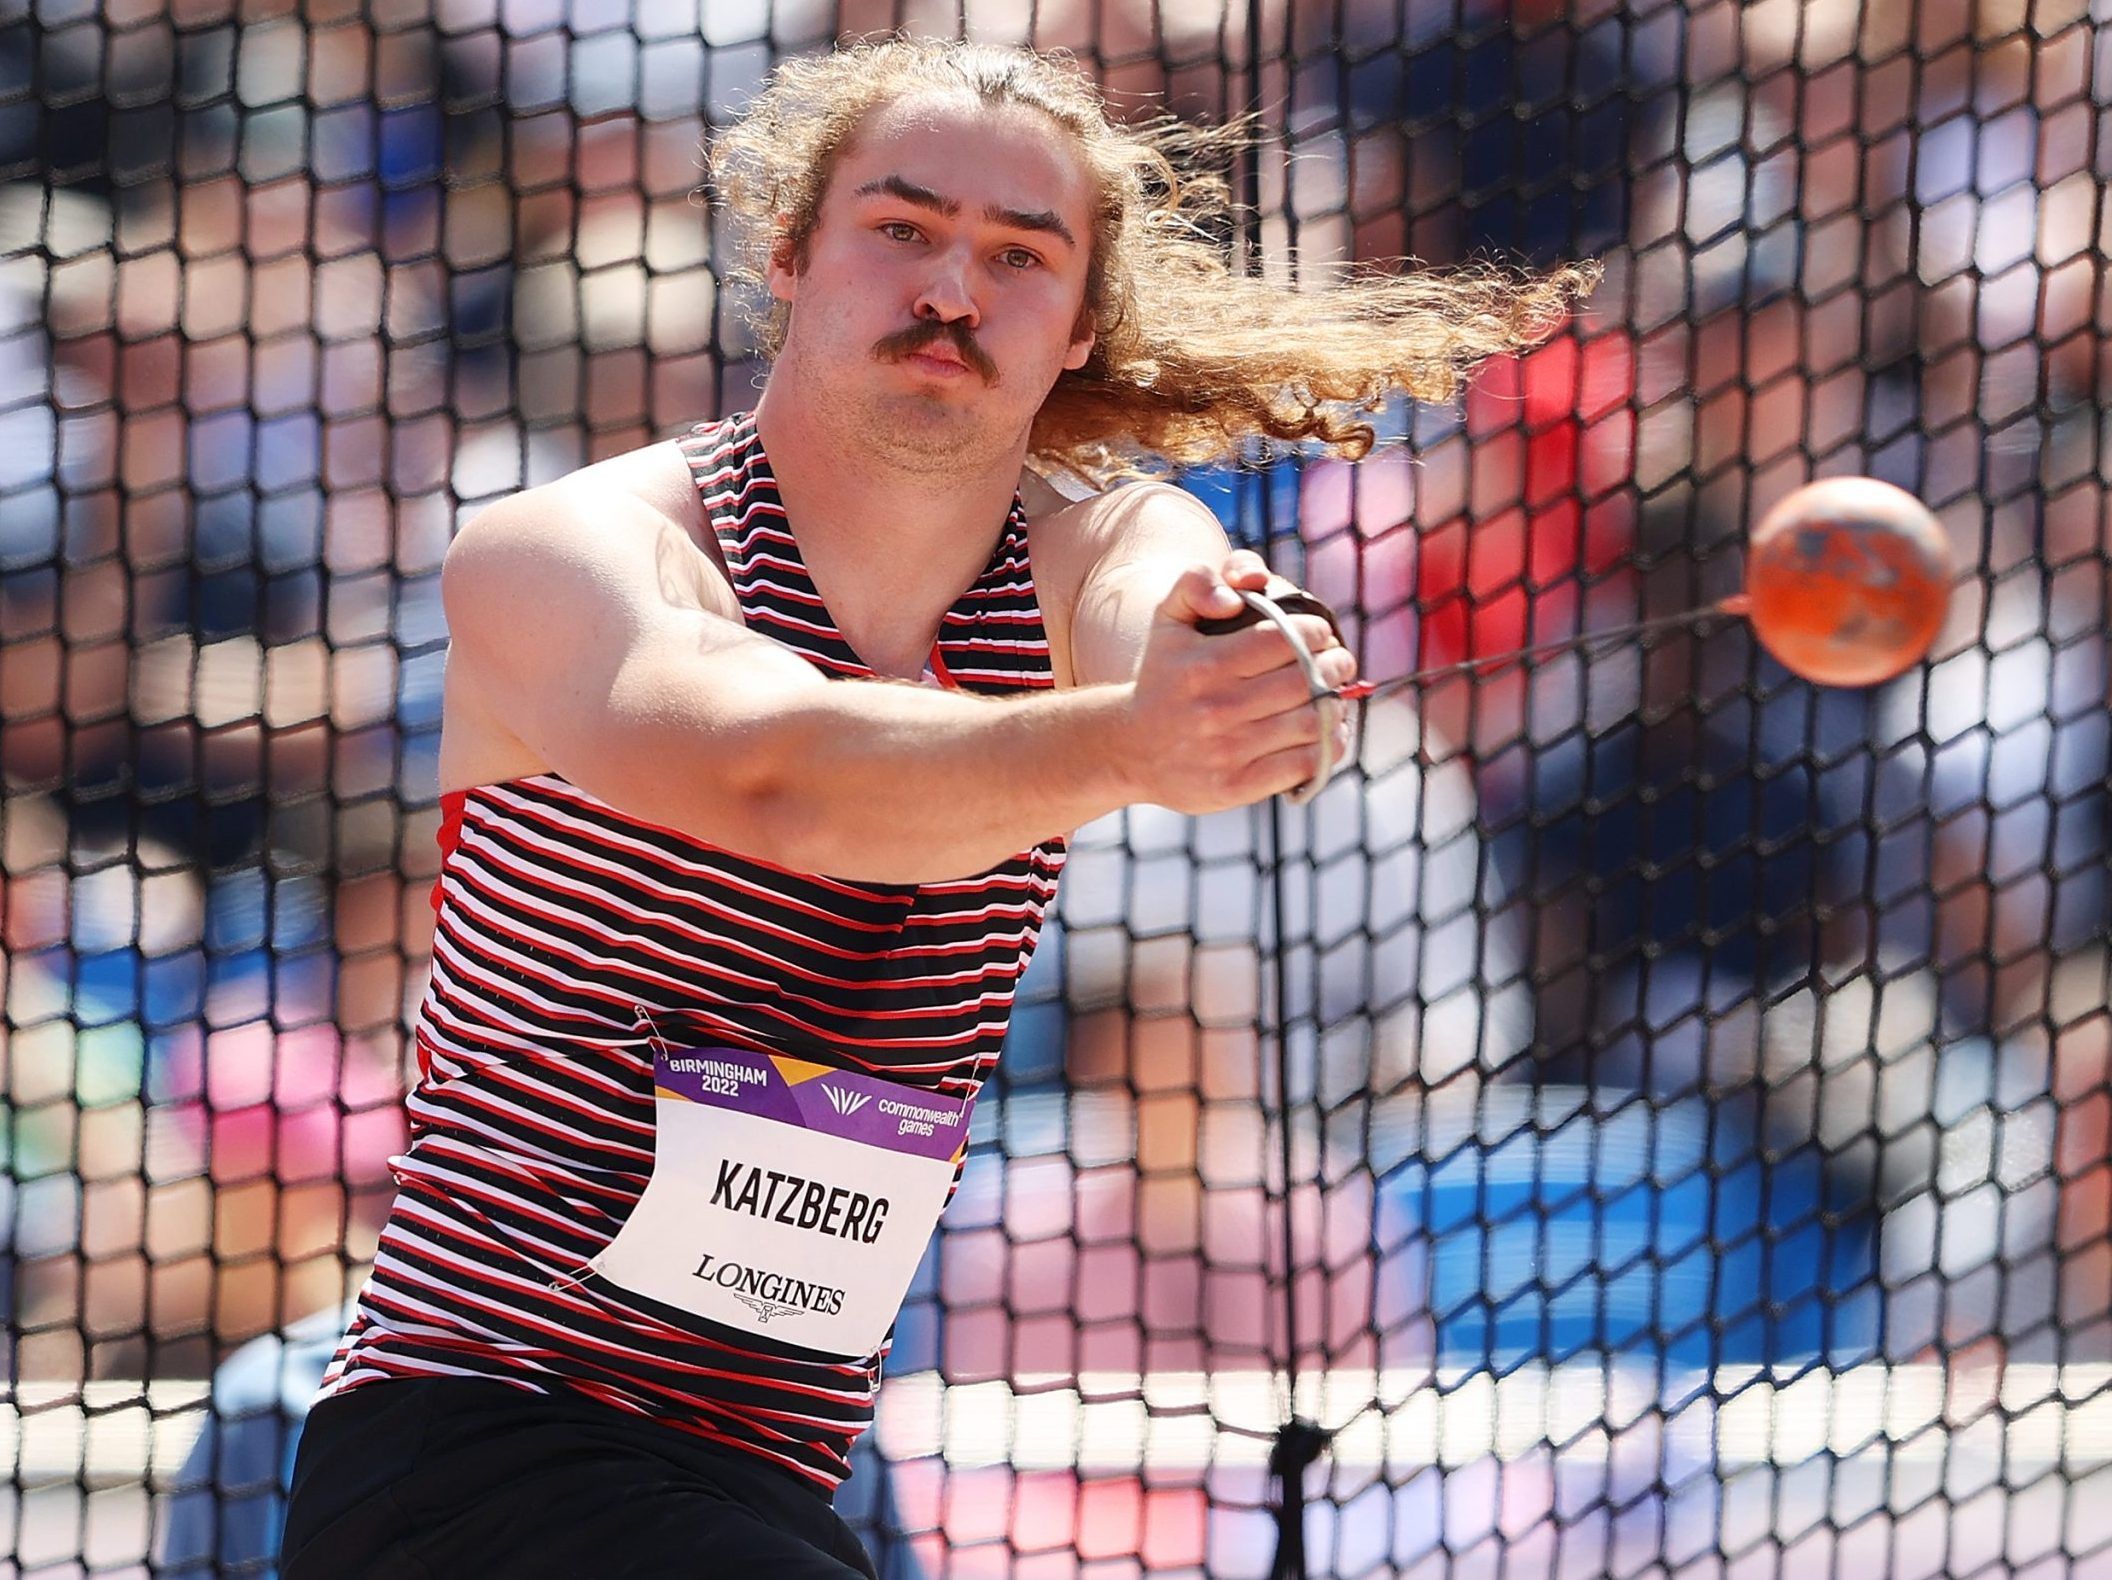 Canada's Rogers wins historic silver in women's hammer throw at